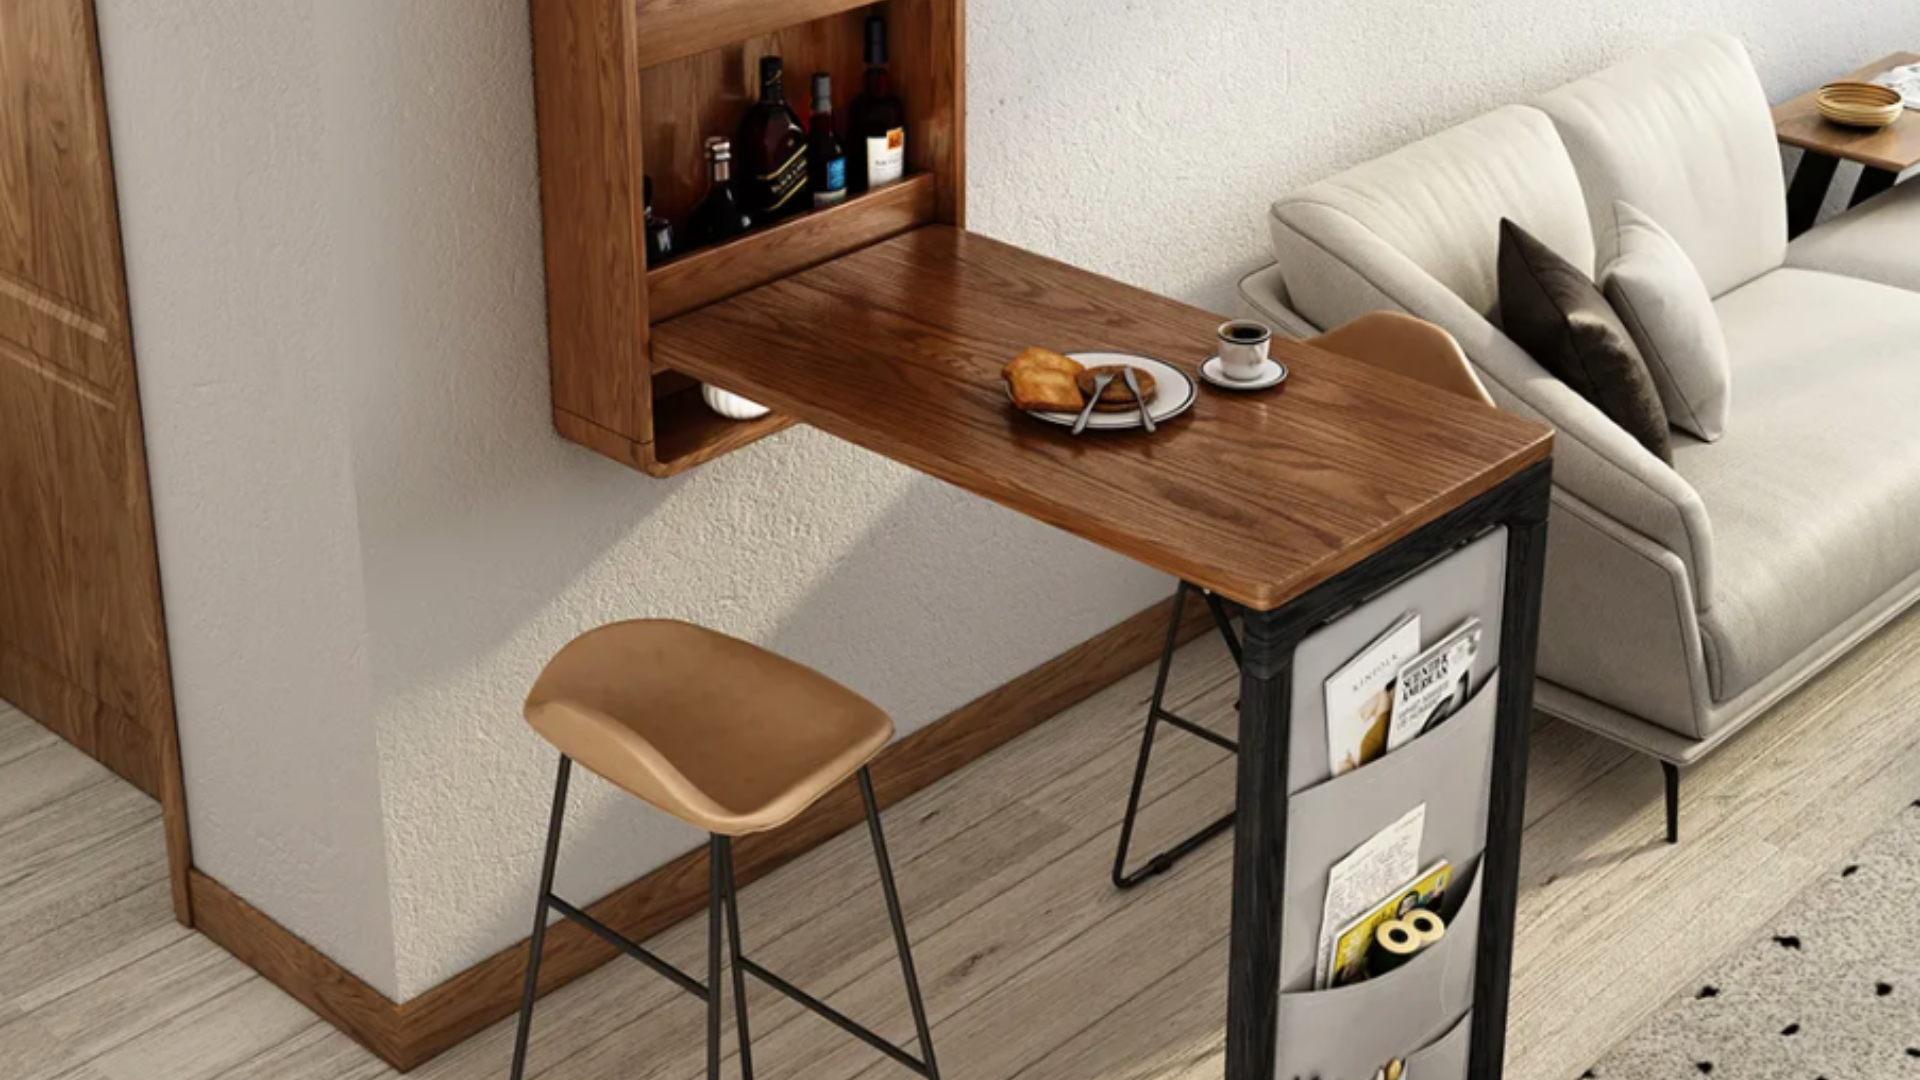 Tiny Home Multi-Functional Furniture for Small Kitchen - Foldable Wooden Table